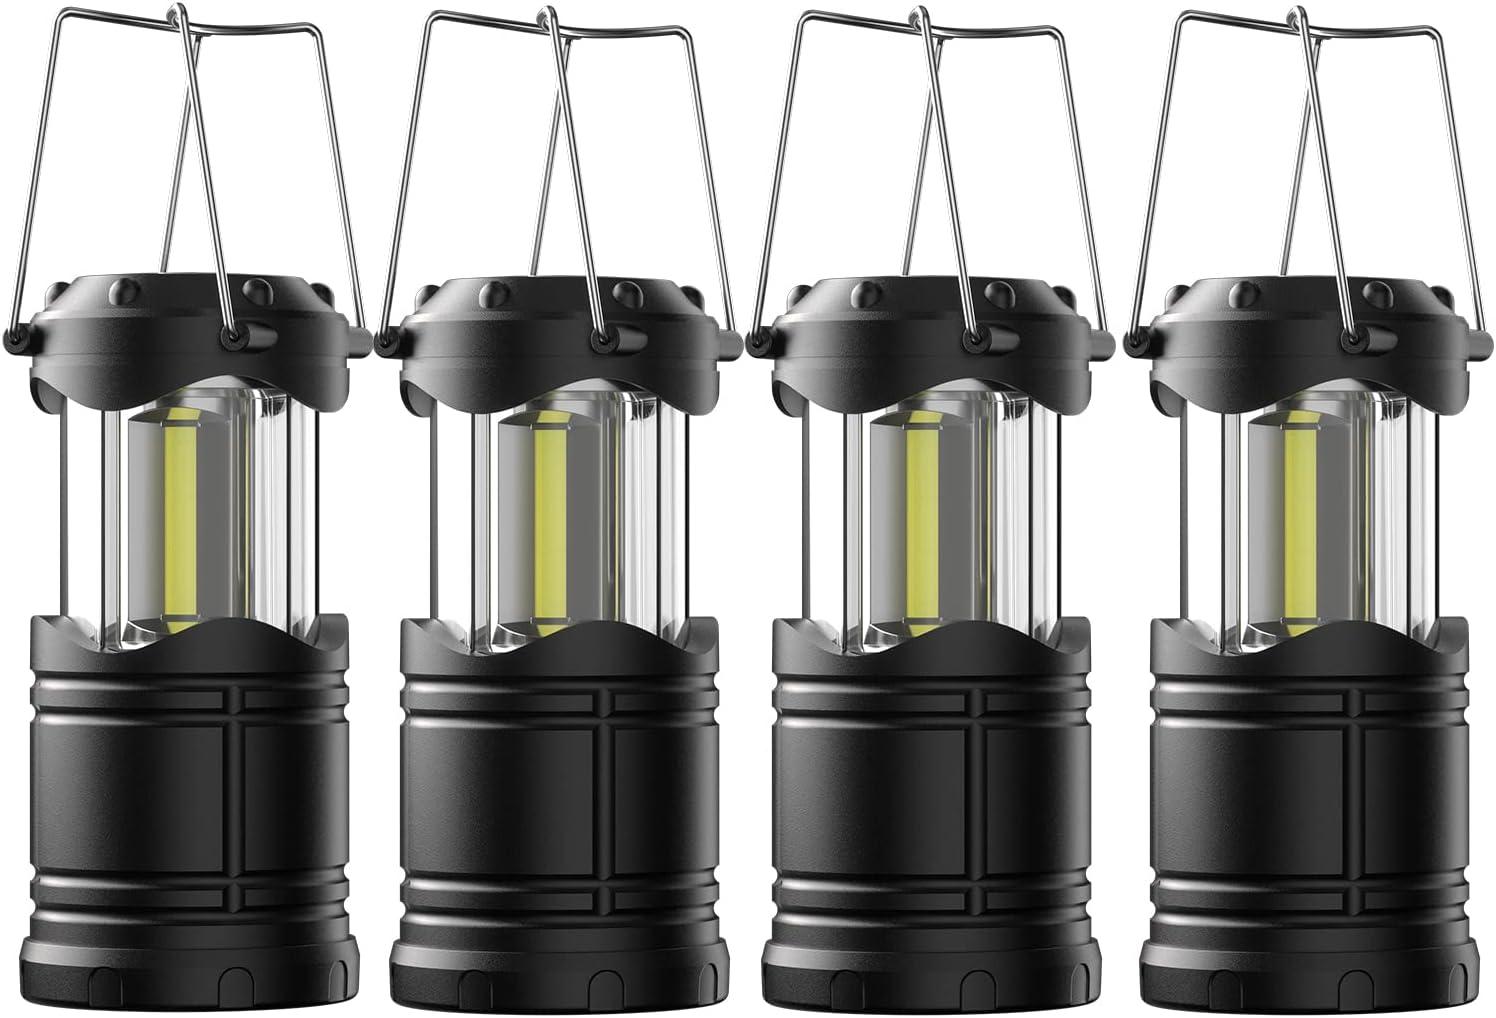 Lichamp Battery Powered LED Camping Lanterns 4 Pack Deals